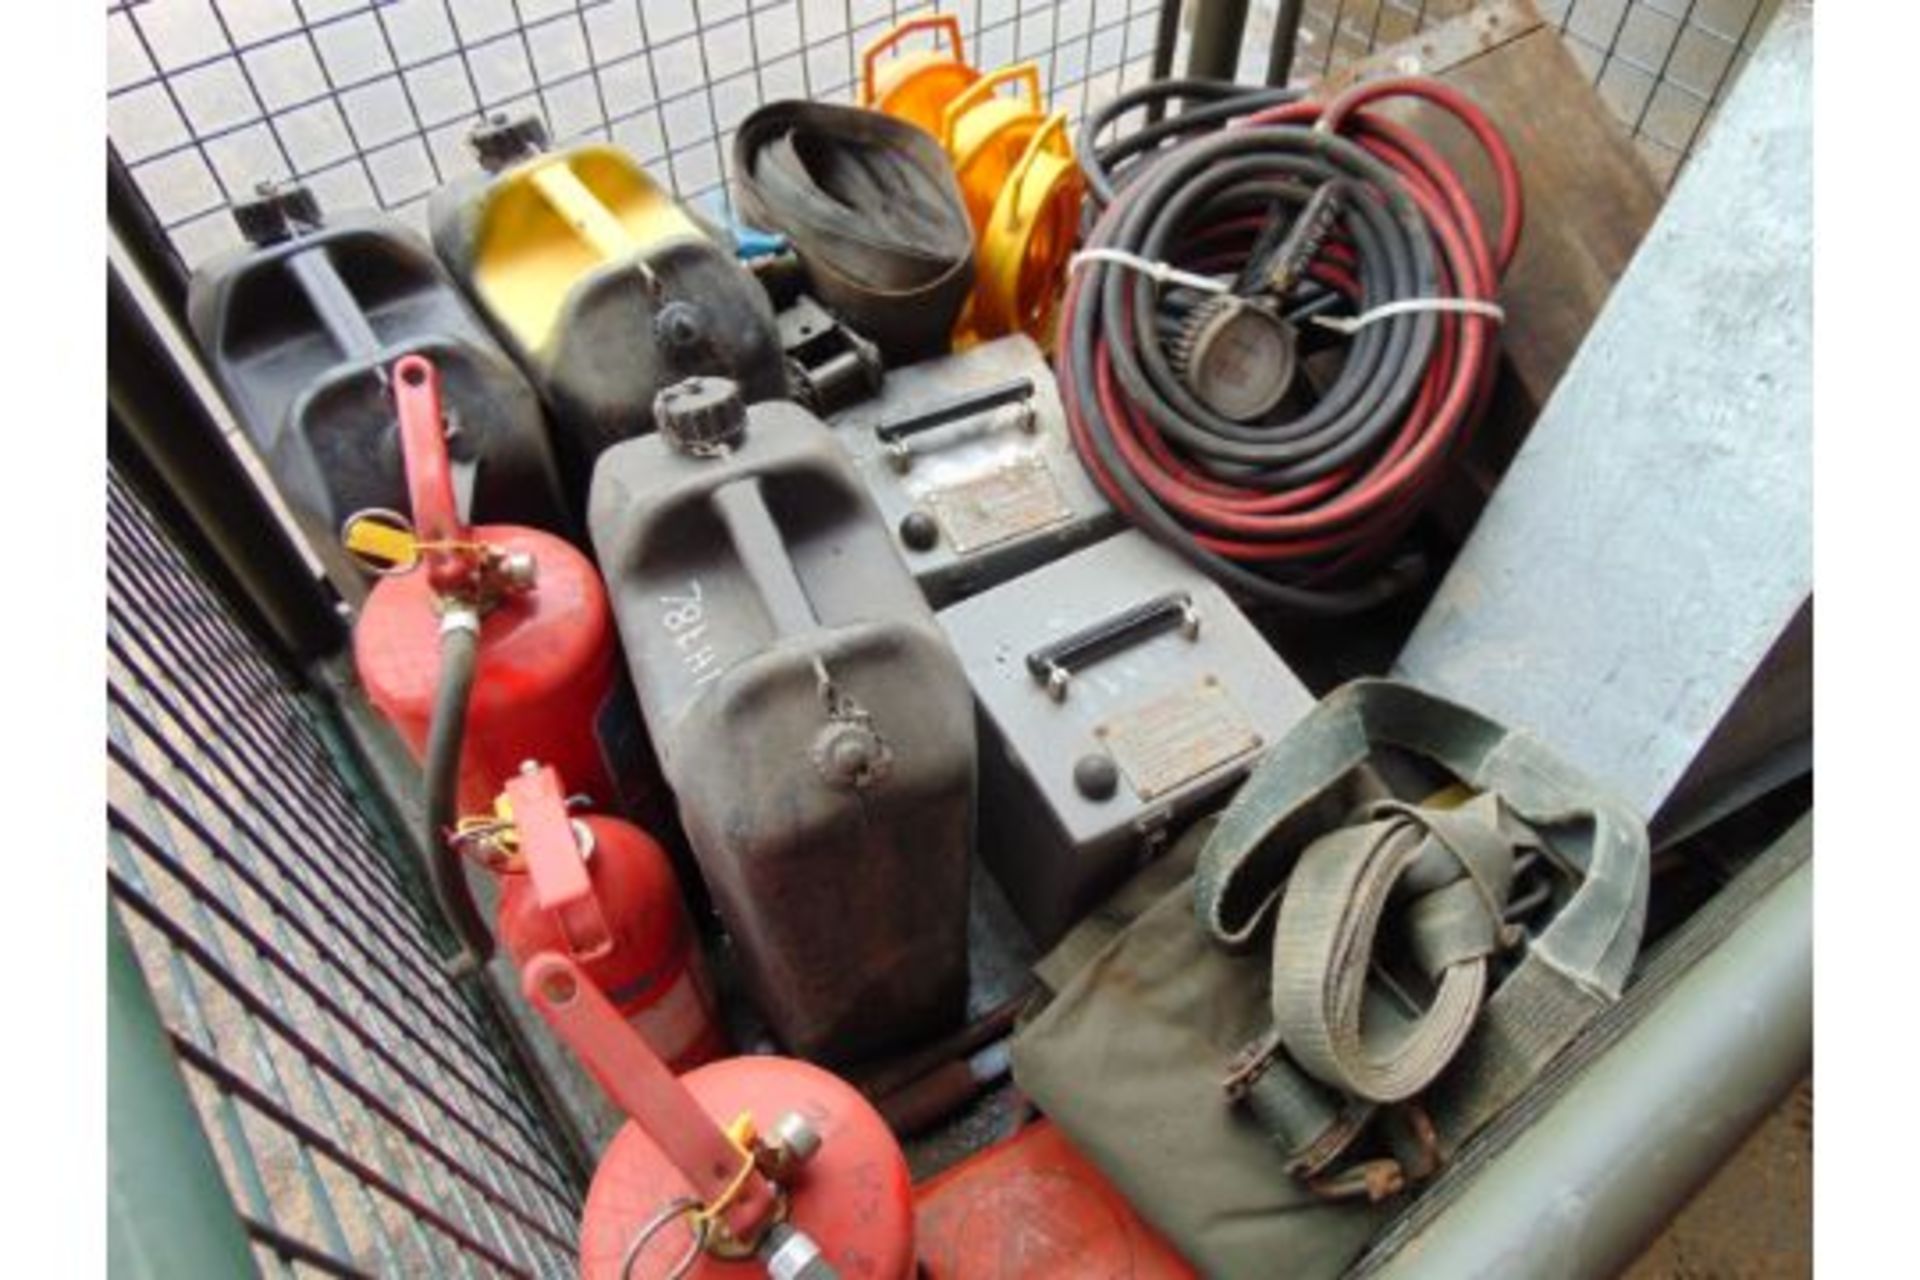 1 x Stillage Air Lines Wheel Chocks, Jerry Cans, Cooking Vessels, Ratchet Straps, Fire Extinguisher - Image 2 of 5